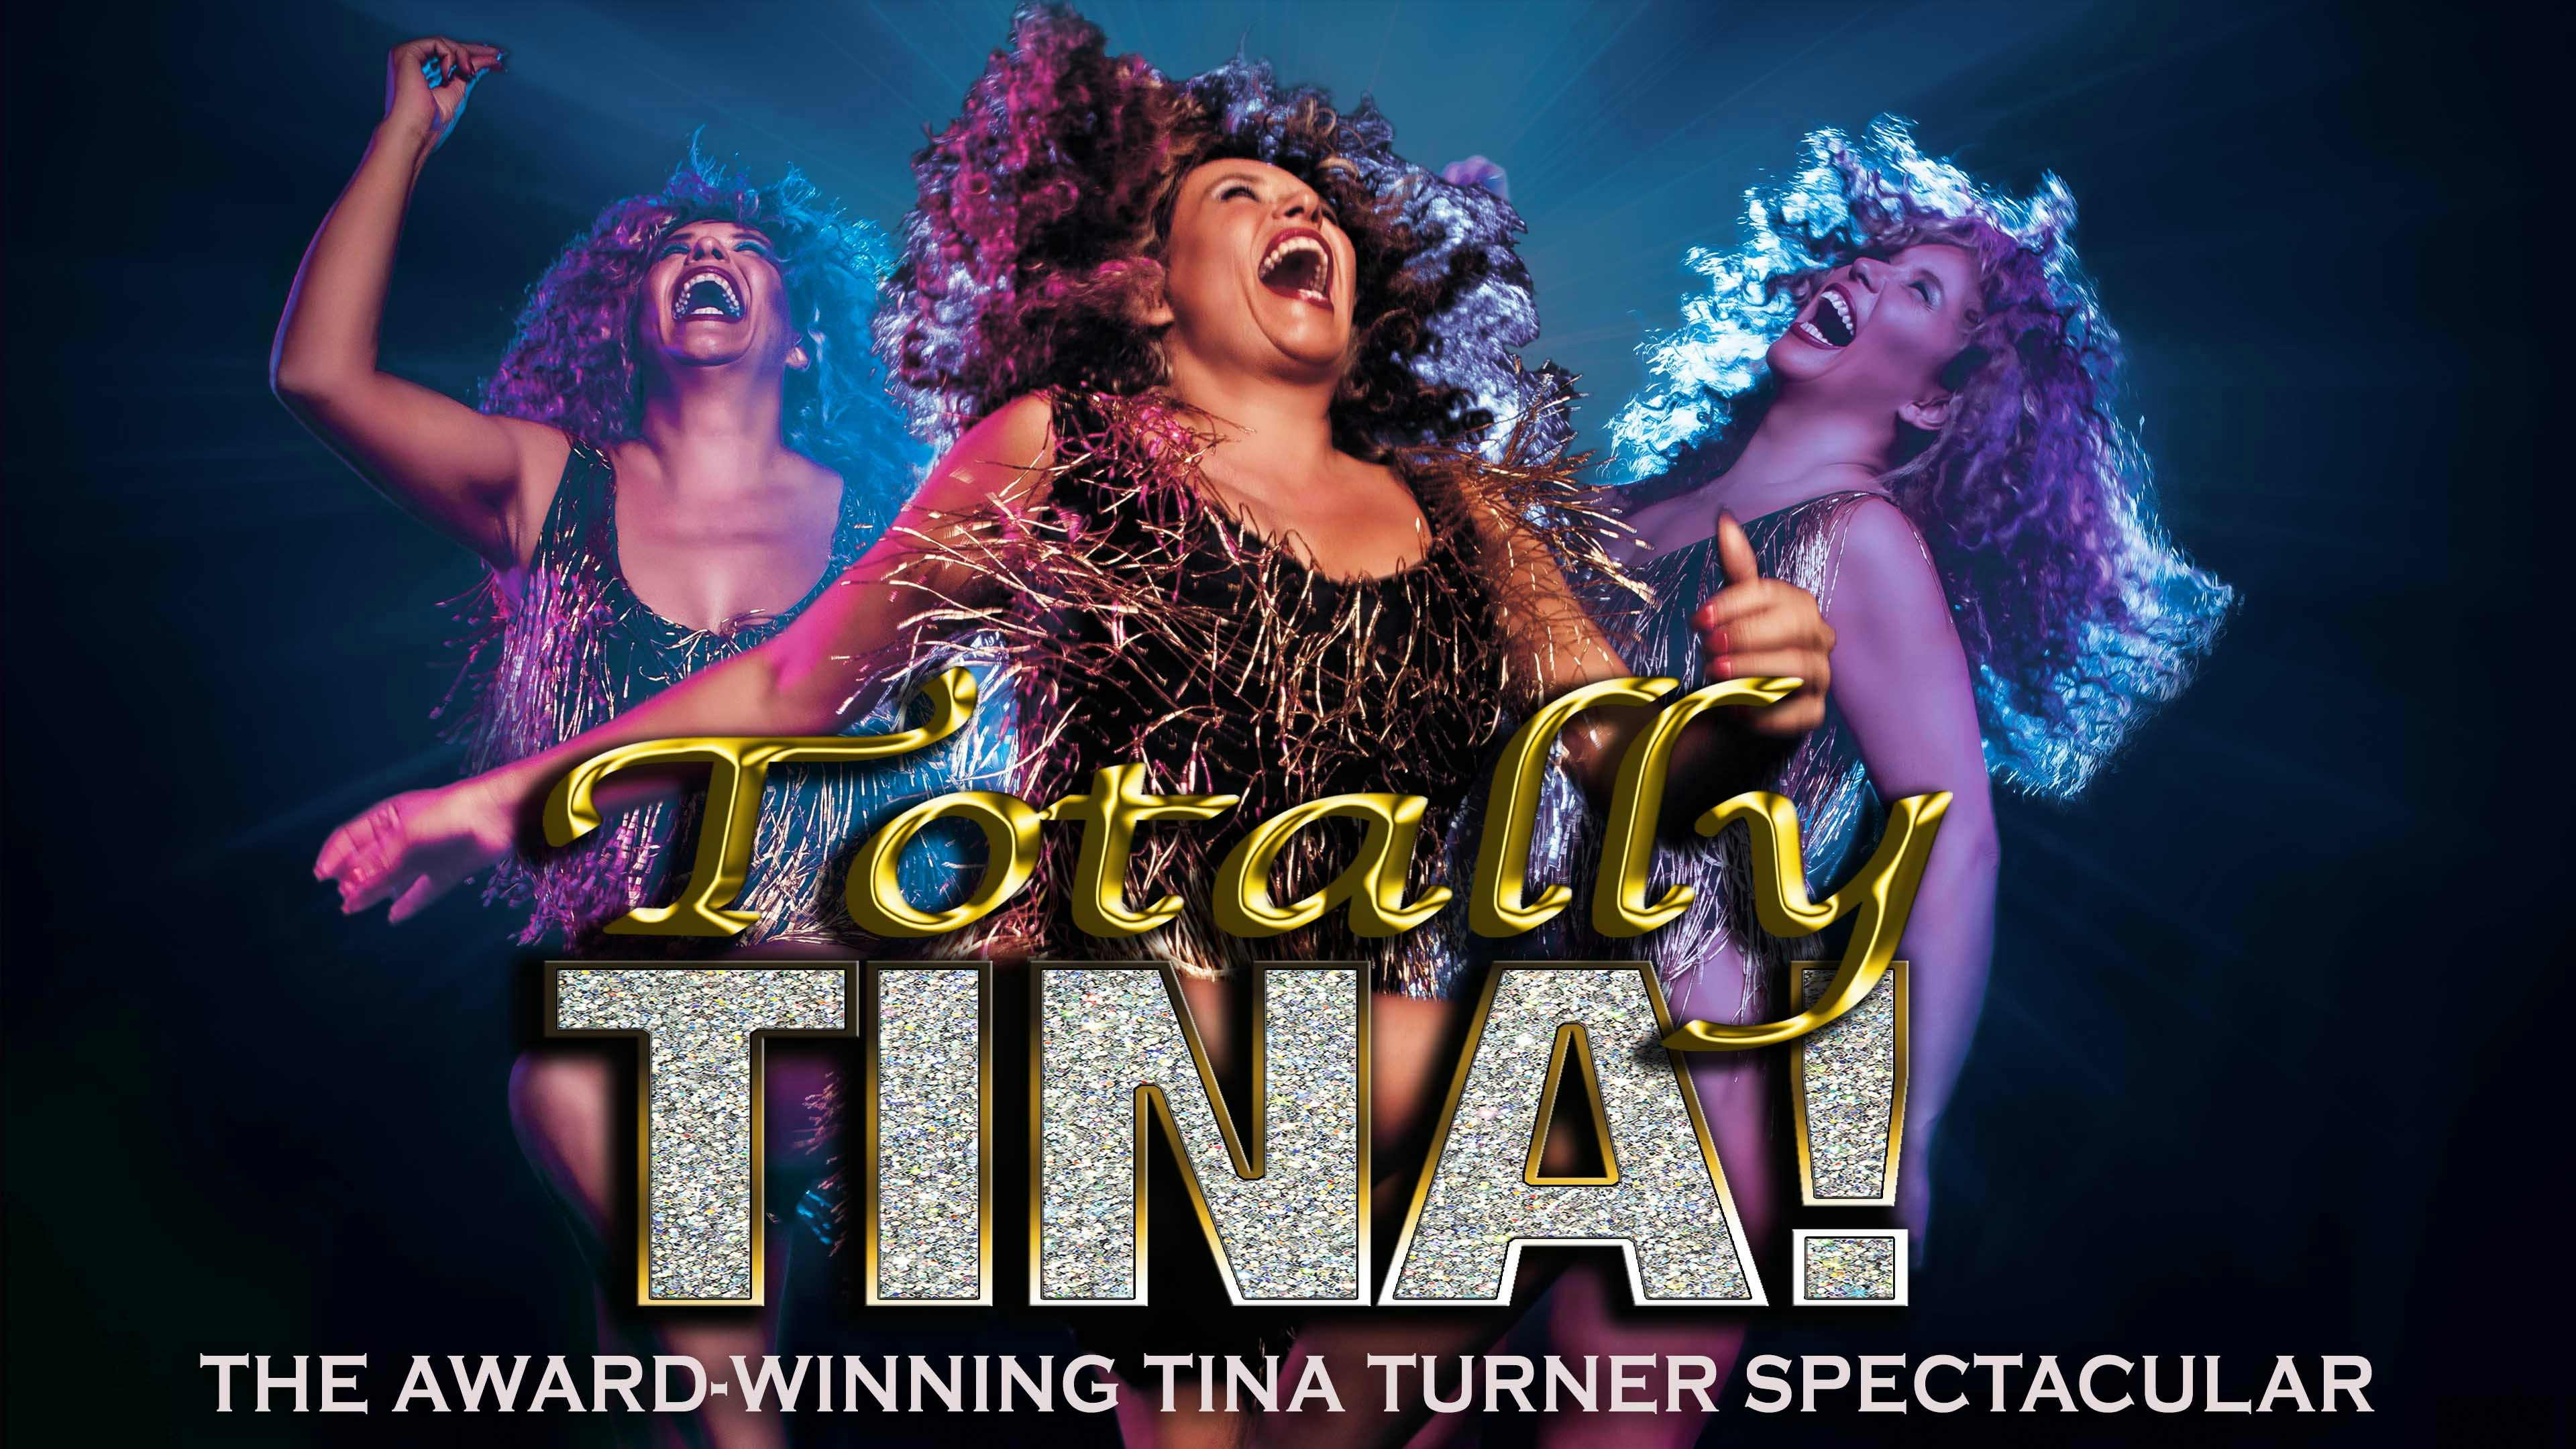 CELEBRATING TINA TURNER with the TOTALLY TINA Theatre Show